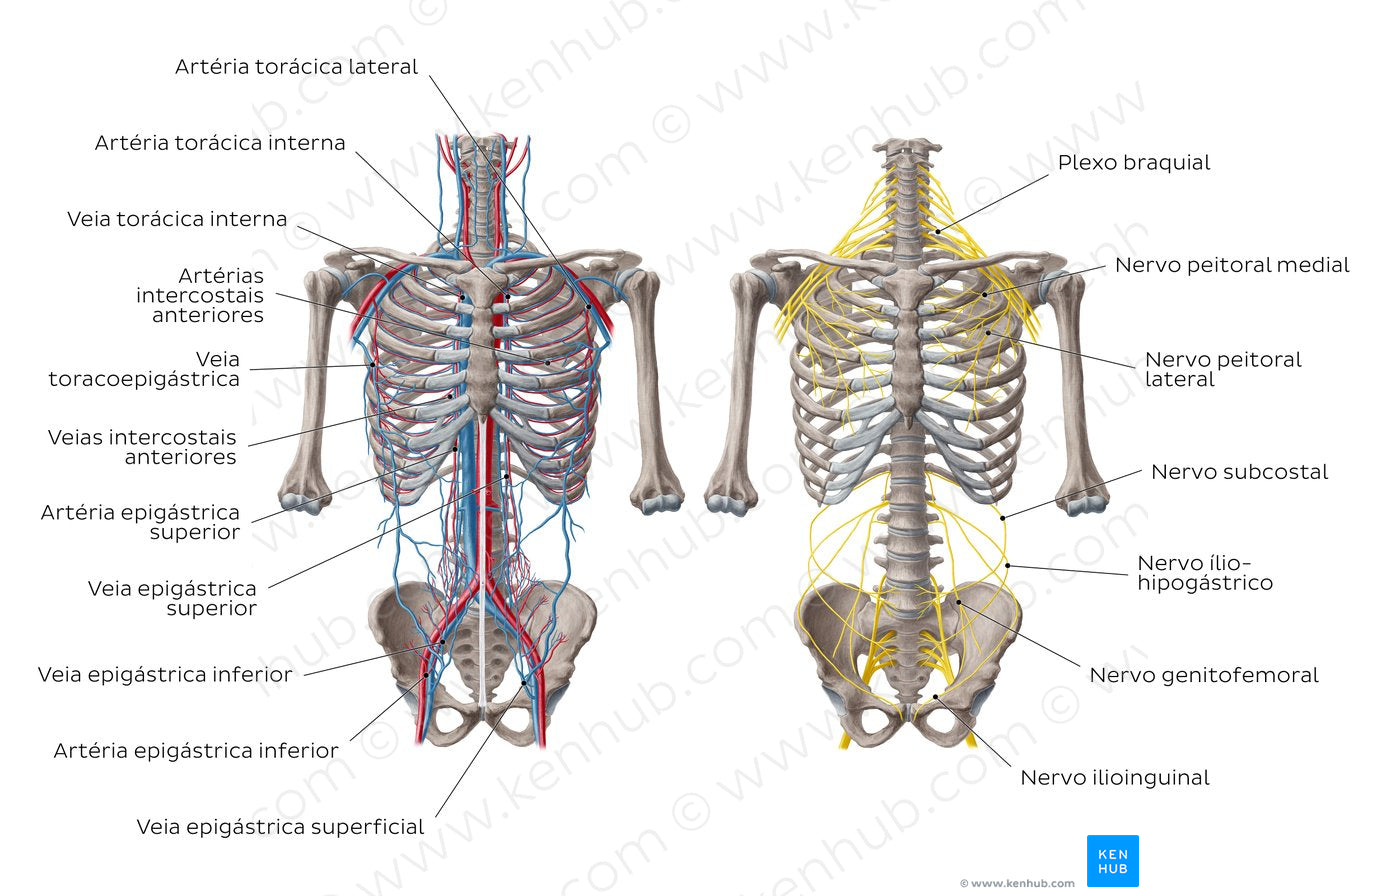 Nerves and vessels of the anterior thoracic wall (Portuguese)